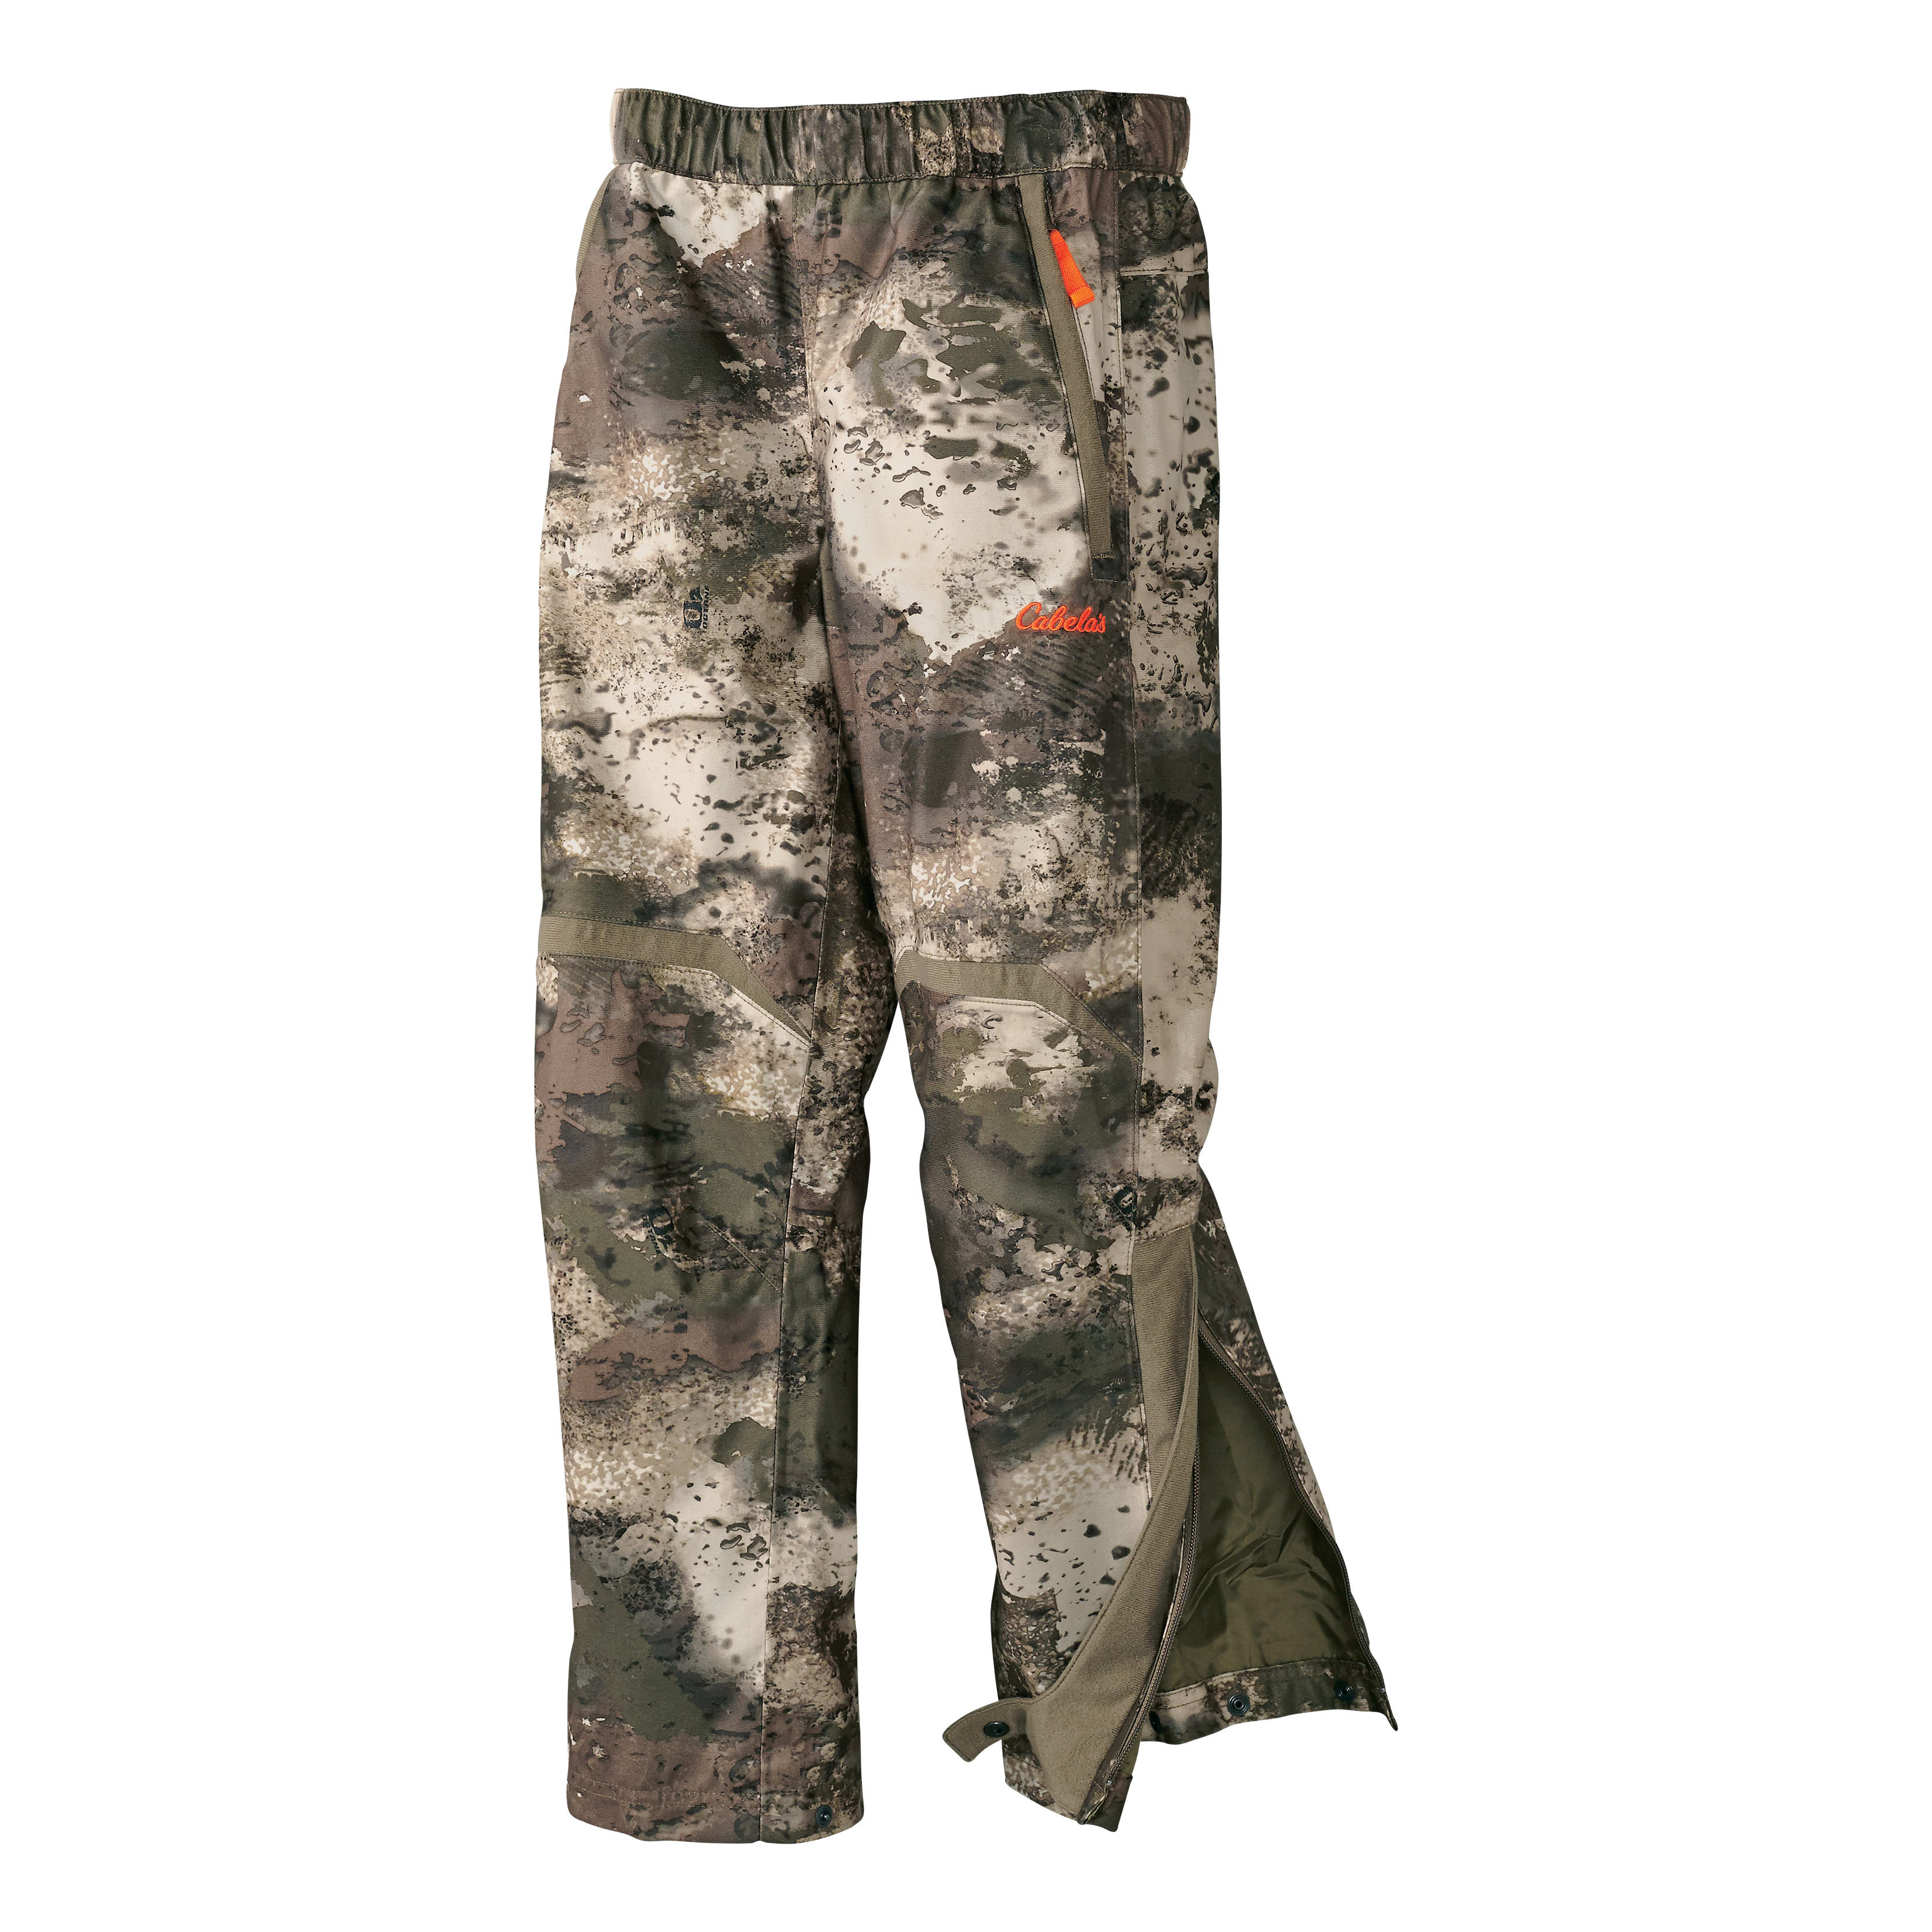 Cabela’s Youth Rain Suede™ Pants with 4MOST DRY PLUS® - Cabela's O2™ Octane